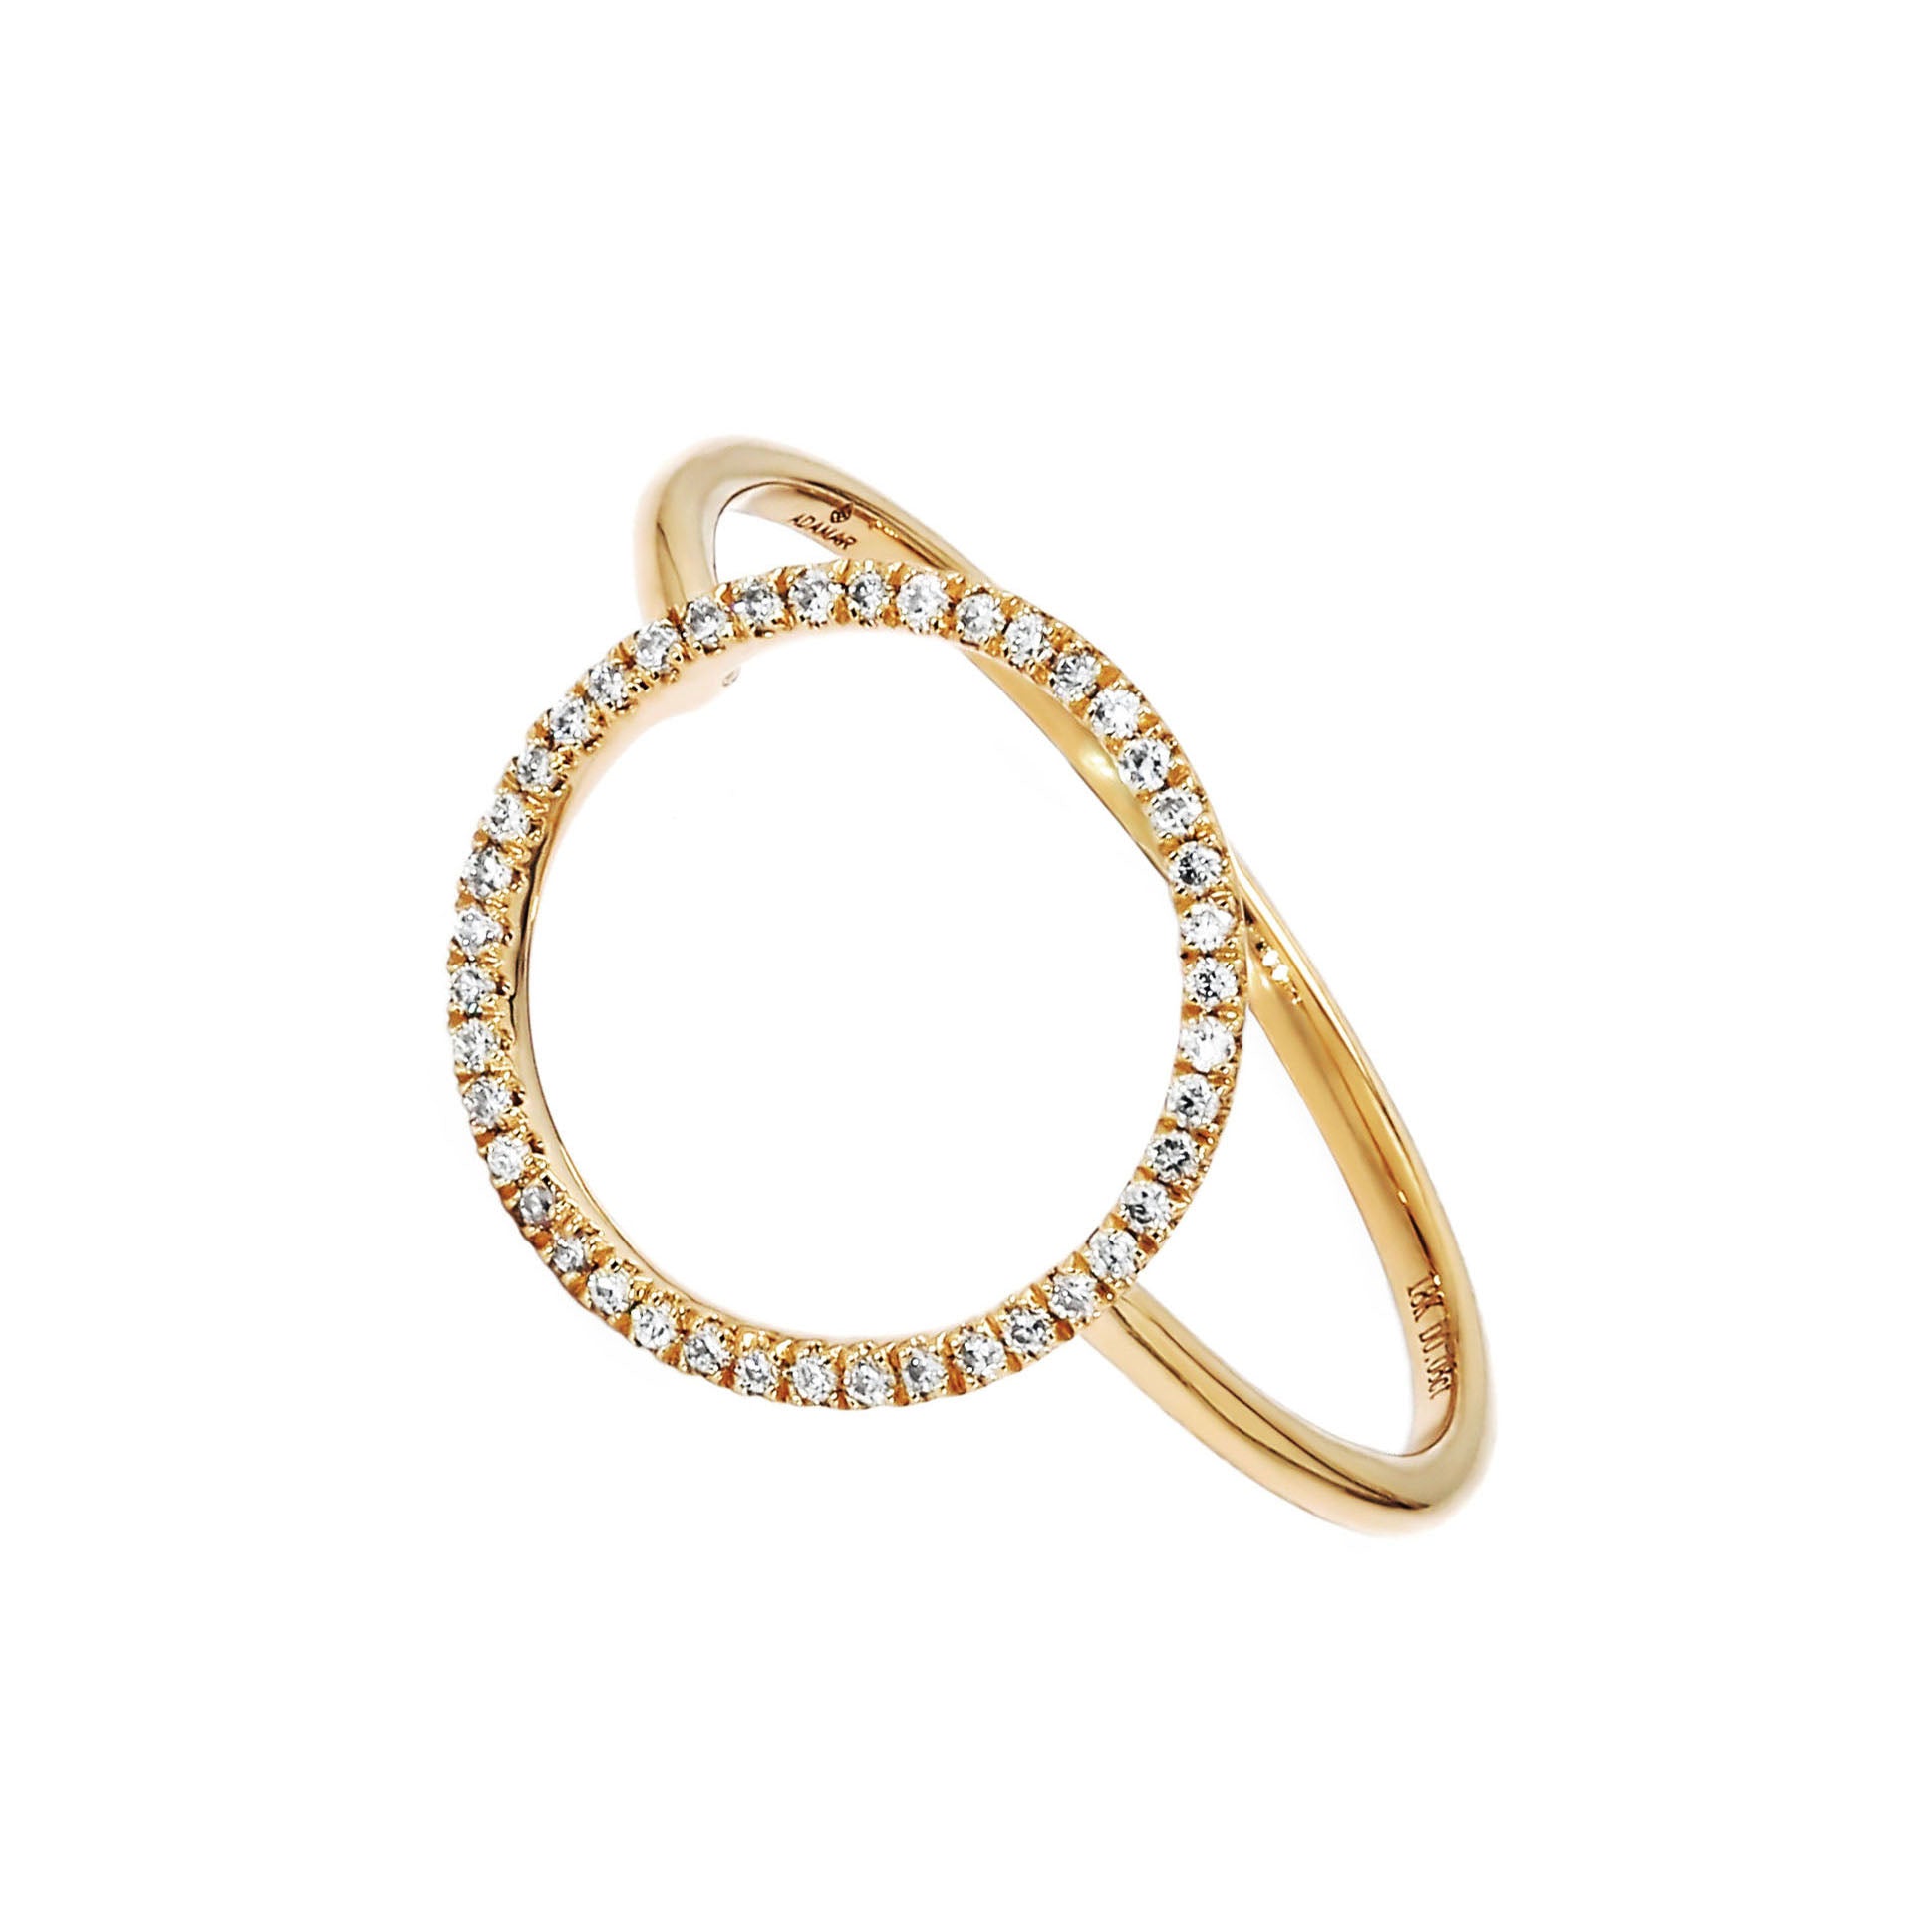 Adamar Jewels LUZ Dom Ring in 18K yellow gold set with diamonds